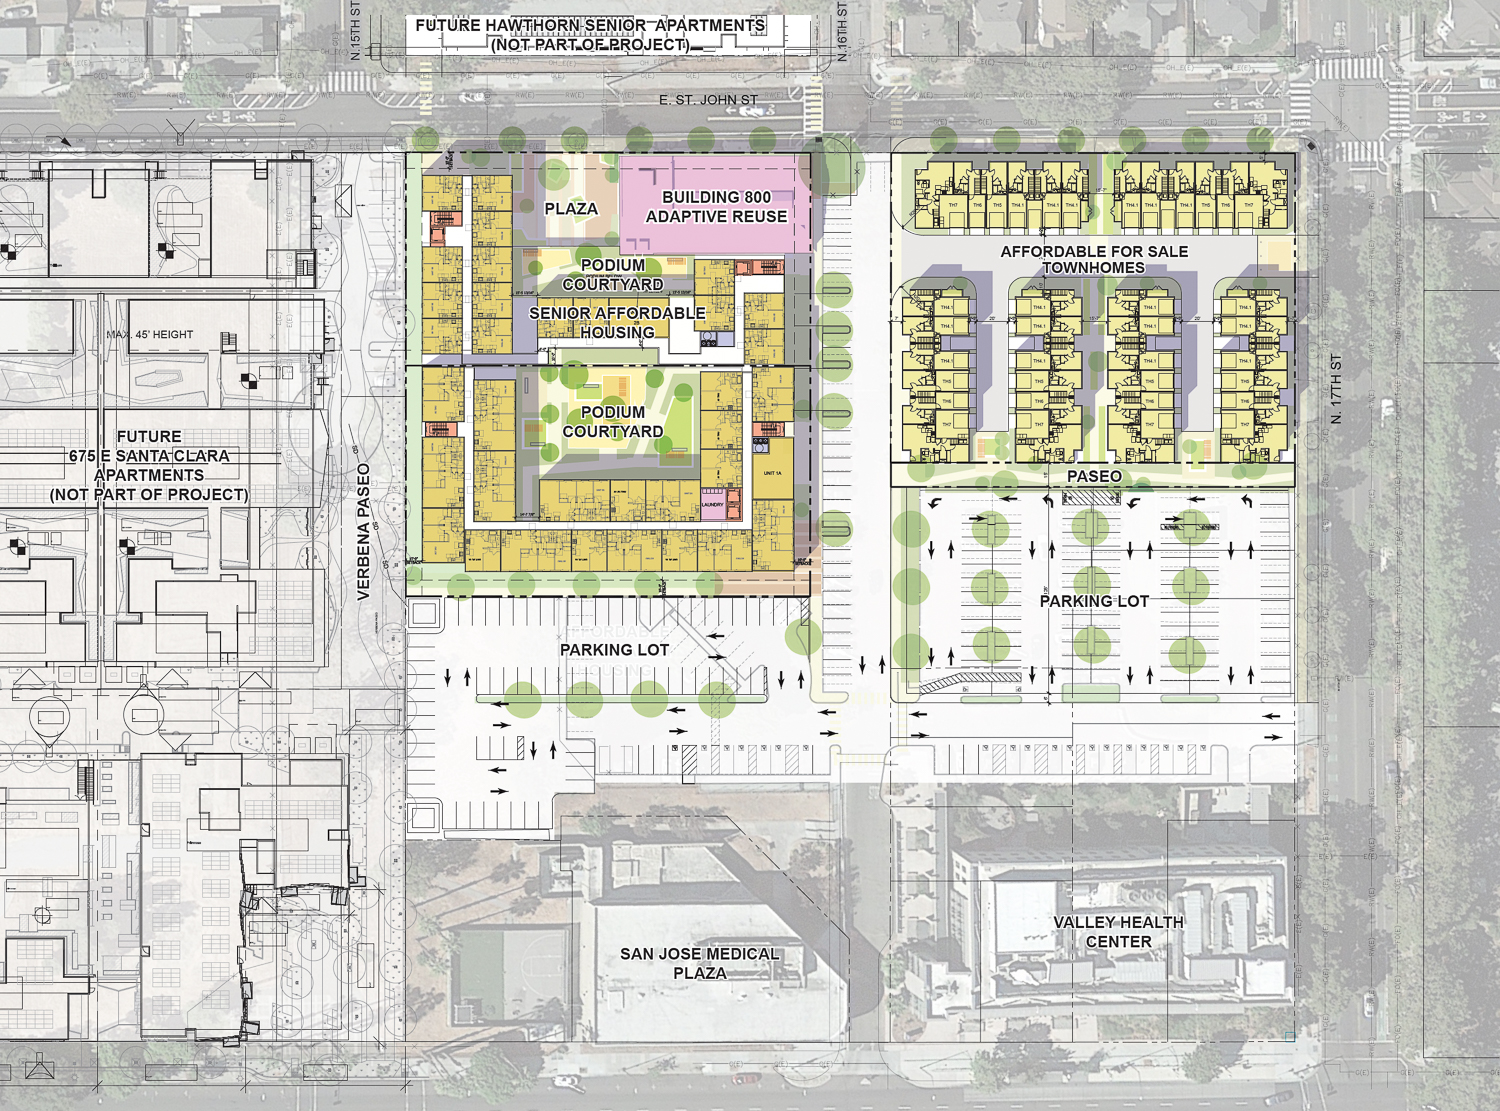 East Santa Clara Street master plan phase two site map, illustration by Studio T Square